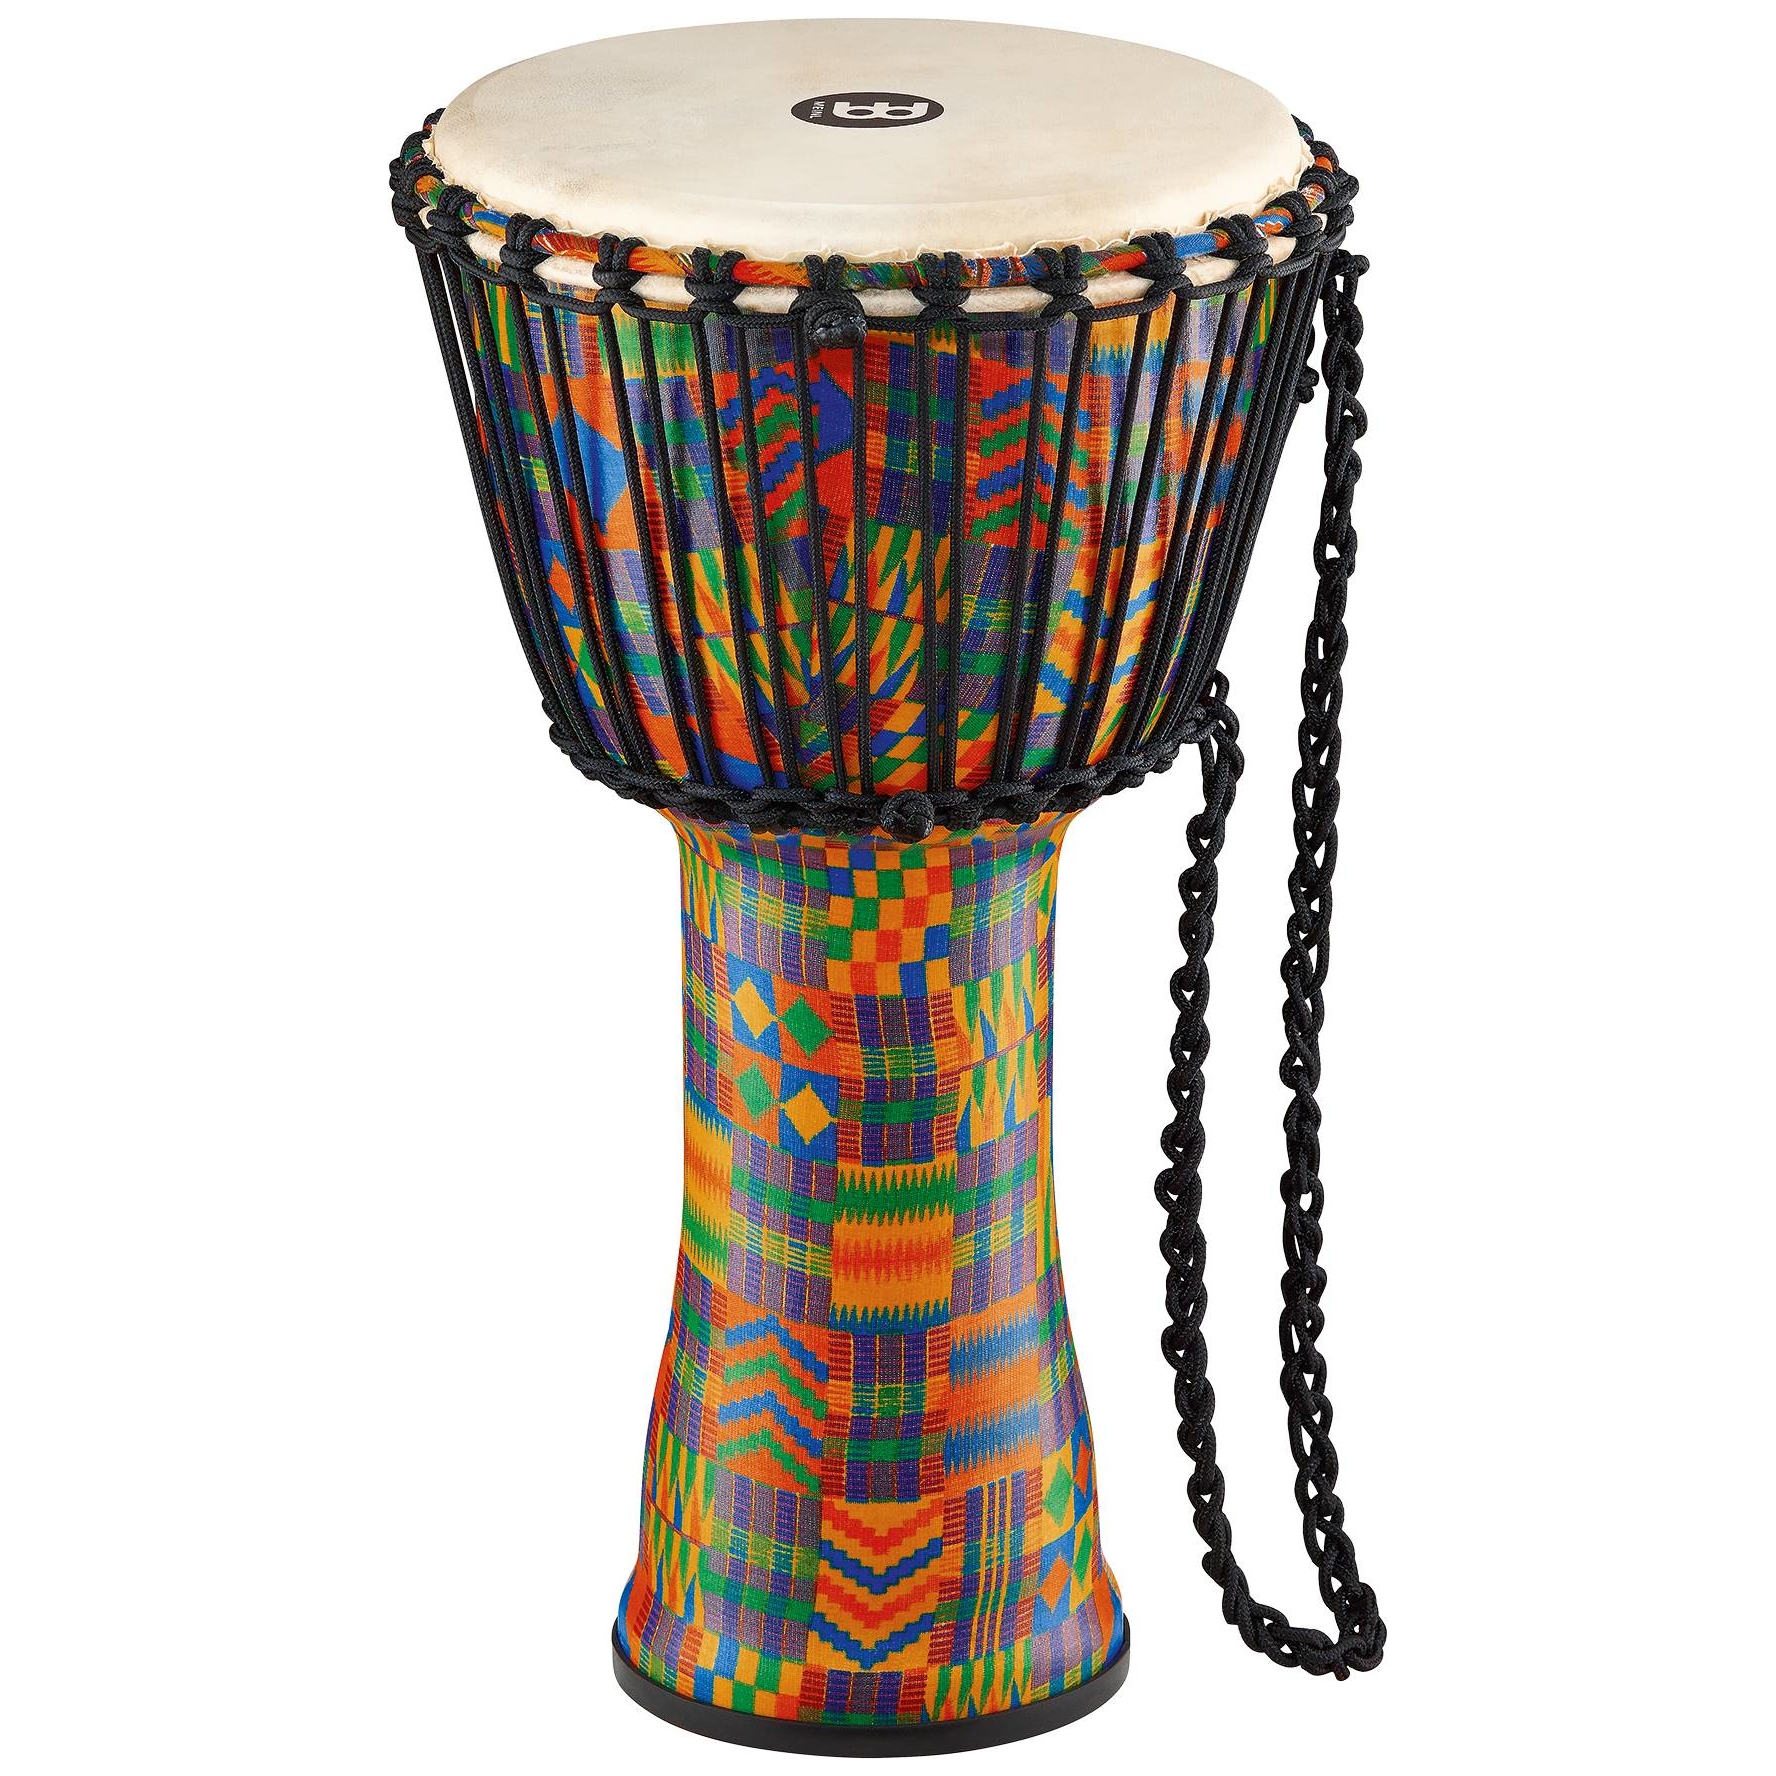 Meinl Percussion PADJ2-M-G - 10" Rope Tuned Travel Series Djembes, Goat Skin Head (Patented), Kenyan Quilt